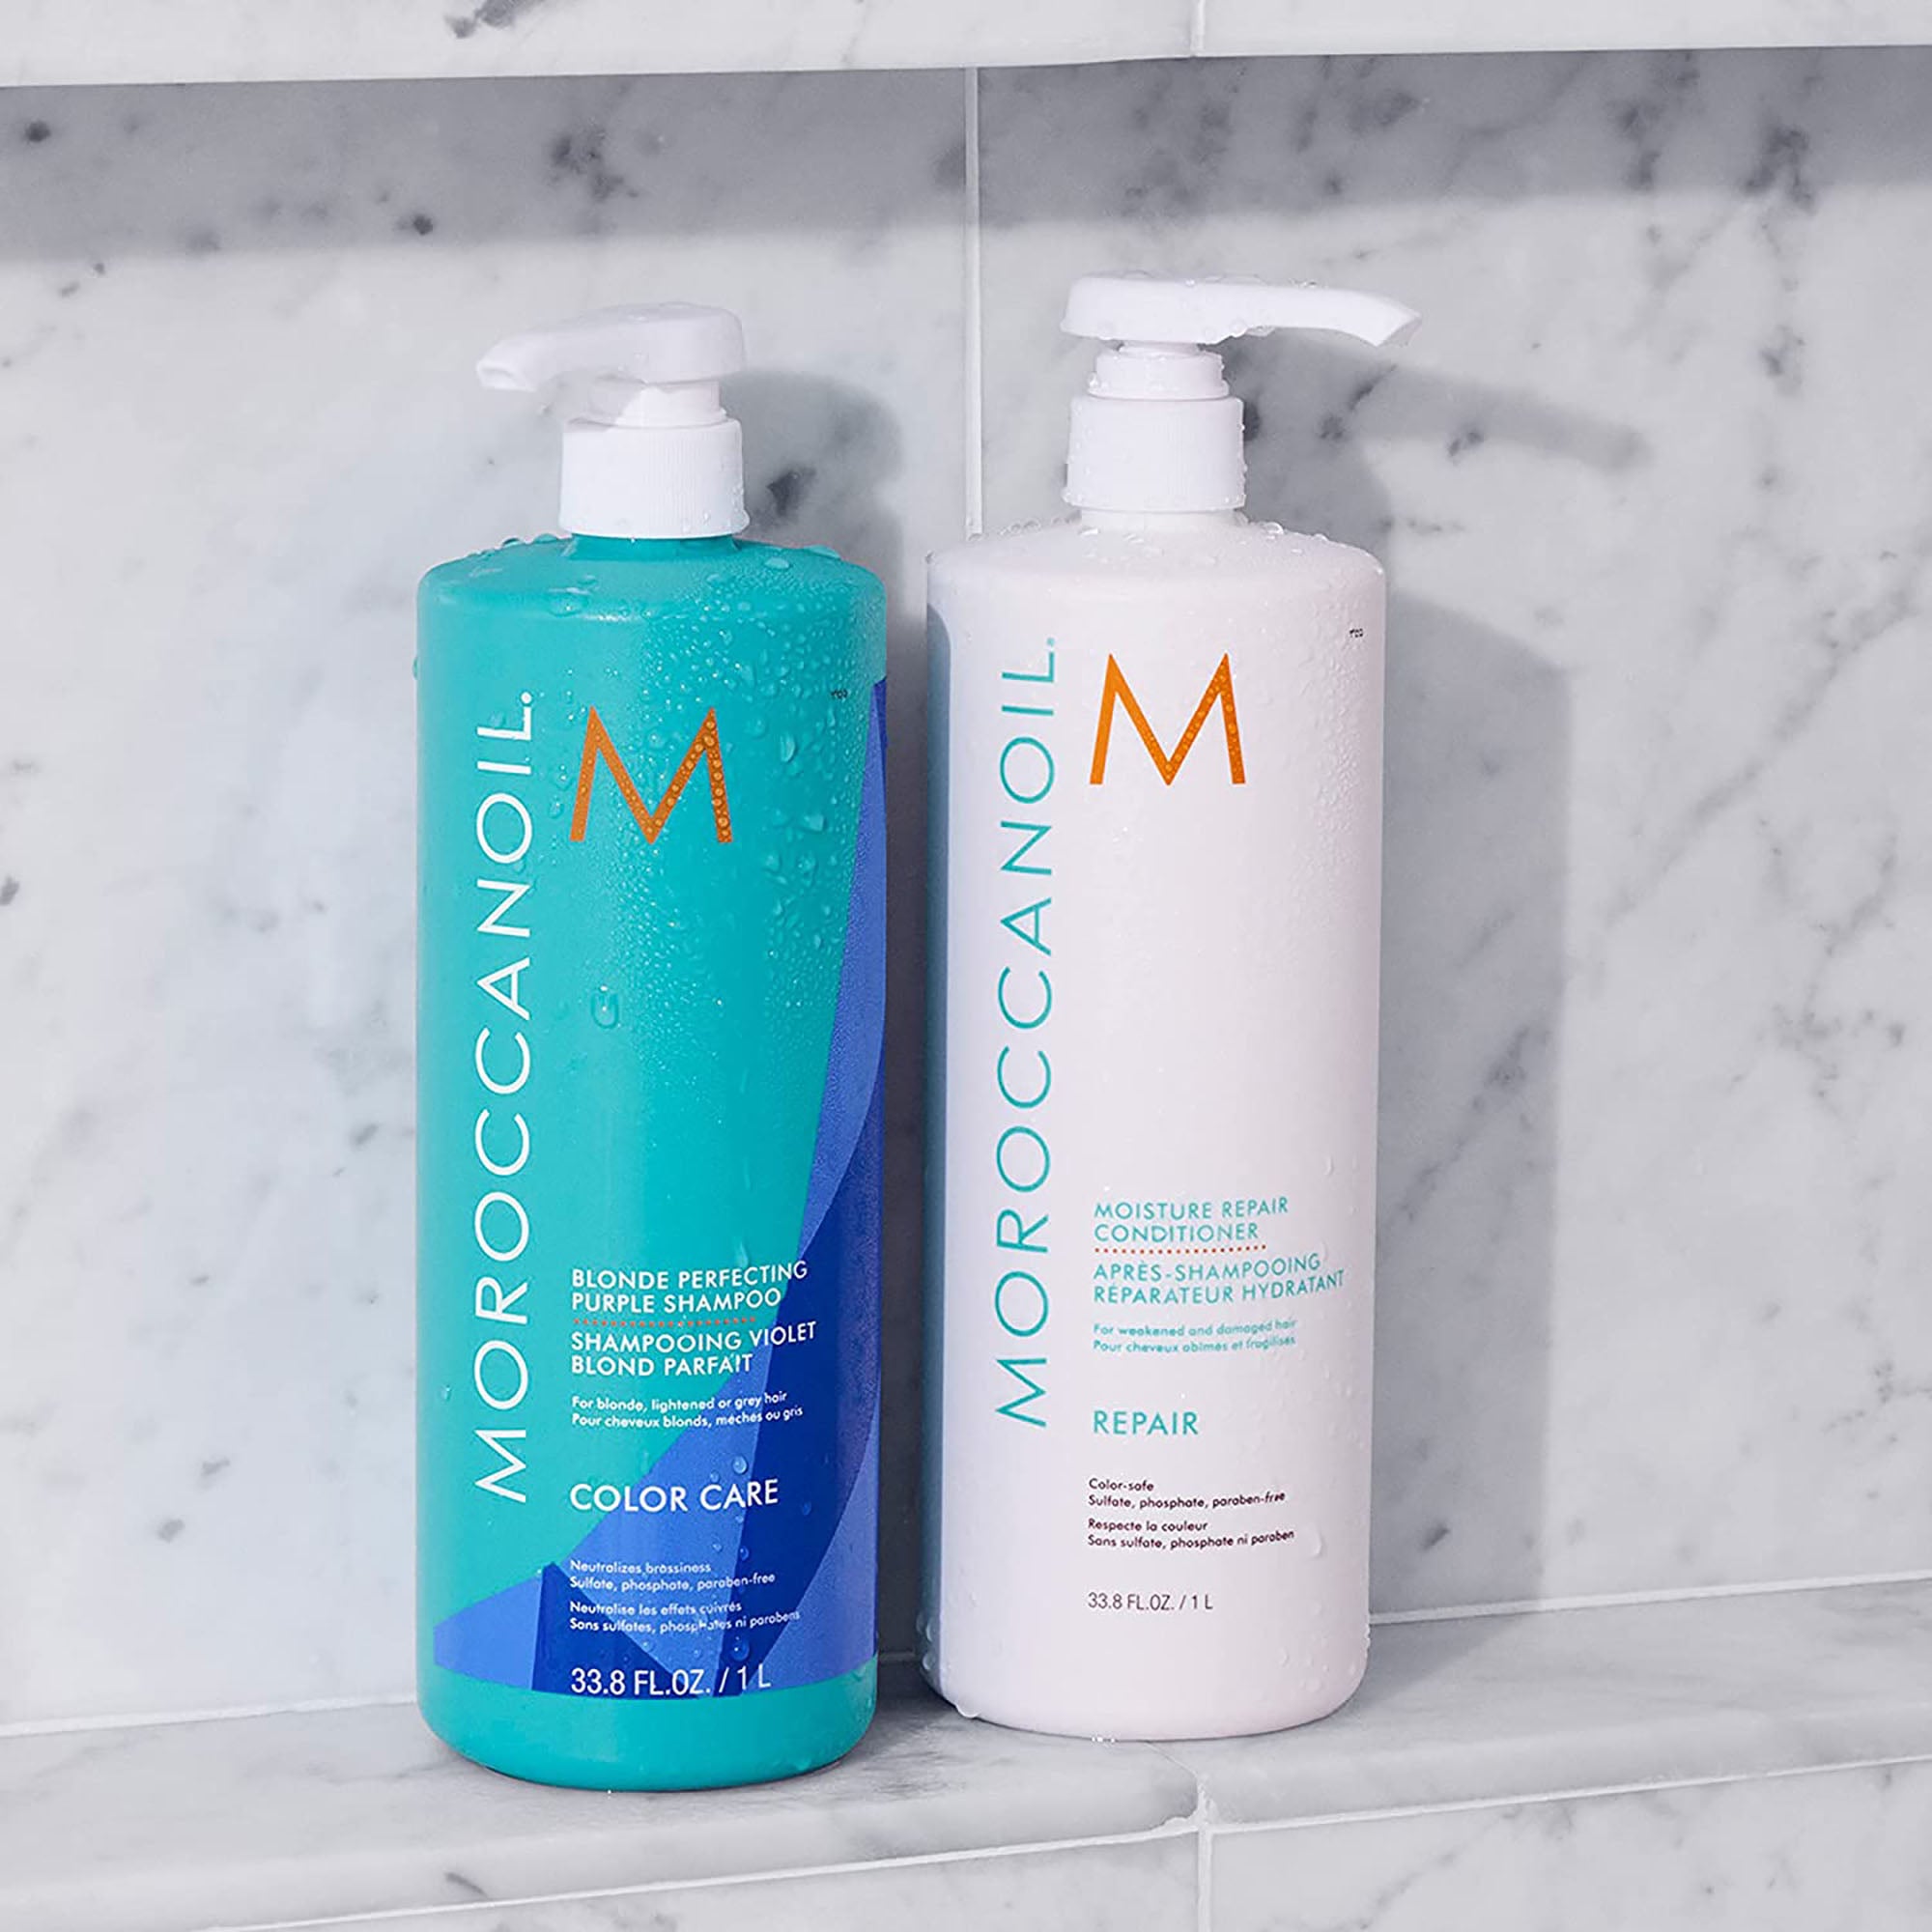 MoroccanOil Blonde Perfecting Shampoo and Conditioner Liter Duo ($150 VALUE) / LITER